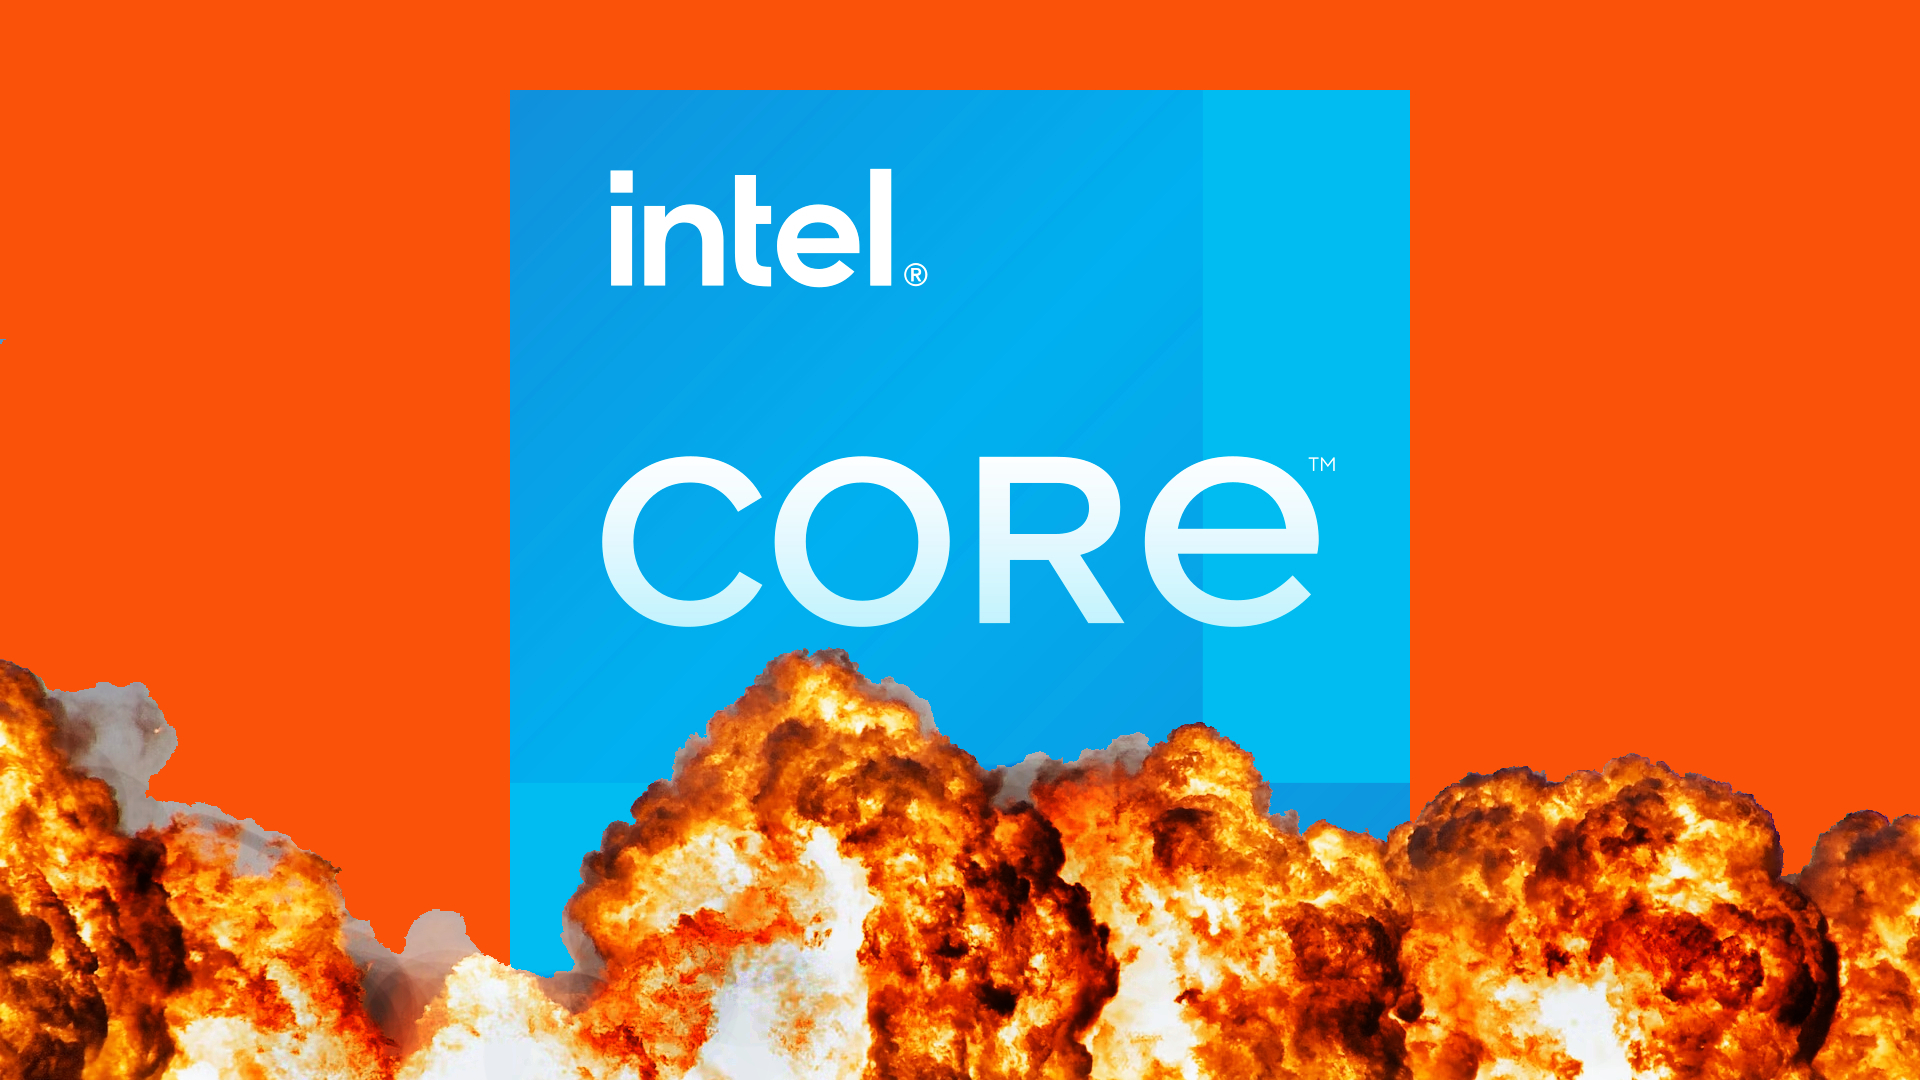 Intel Core i7 14700K could arrive in October